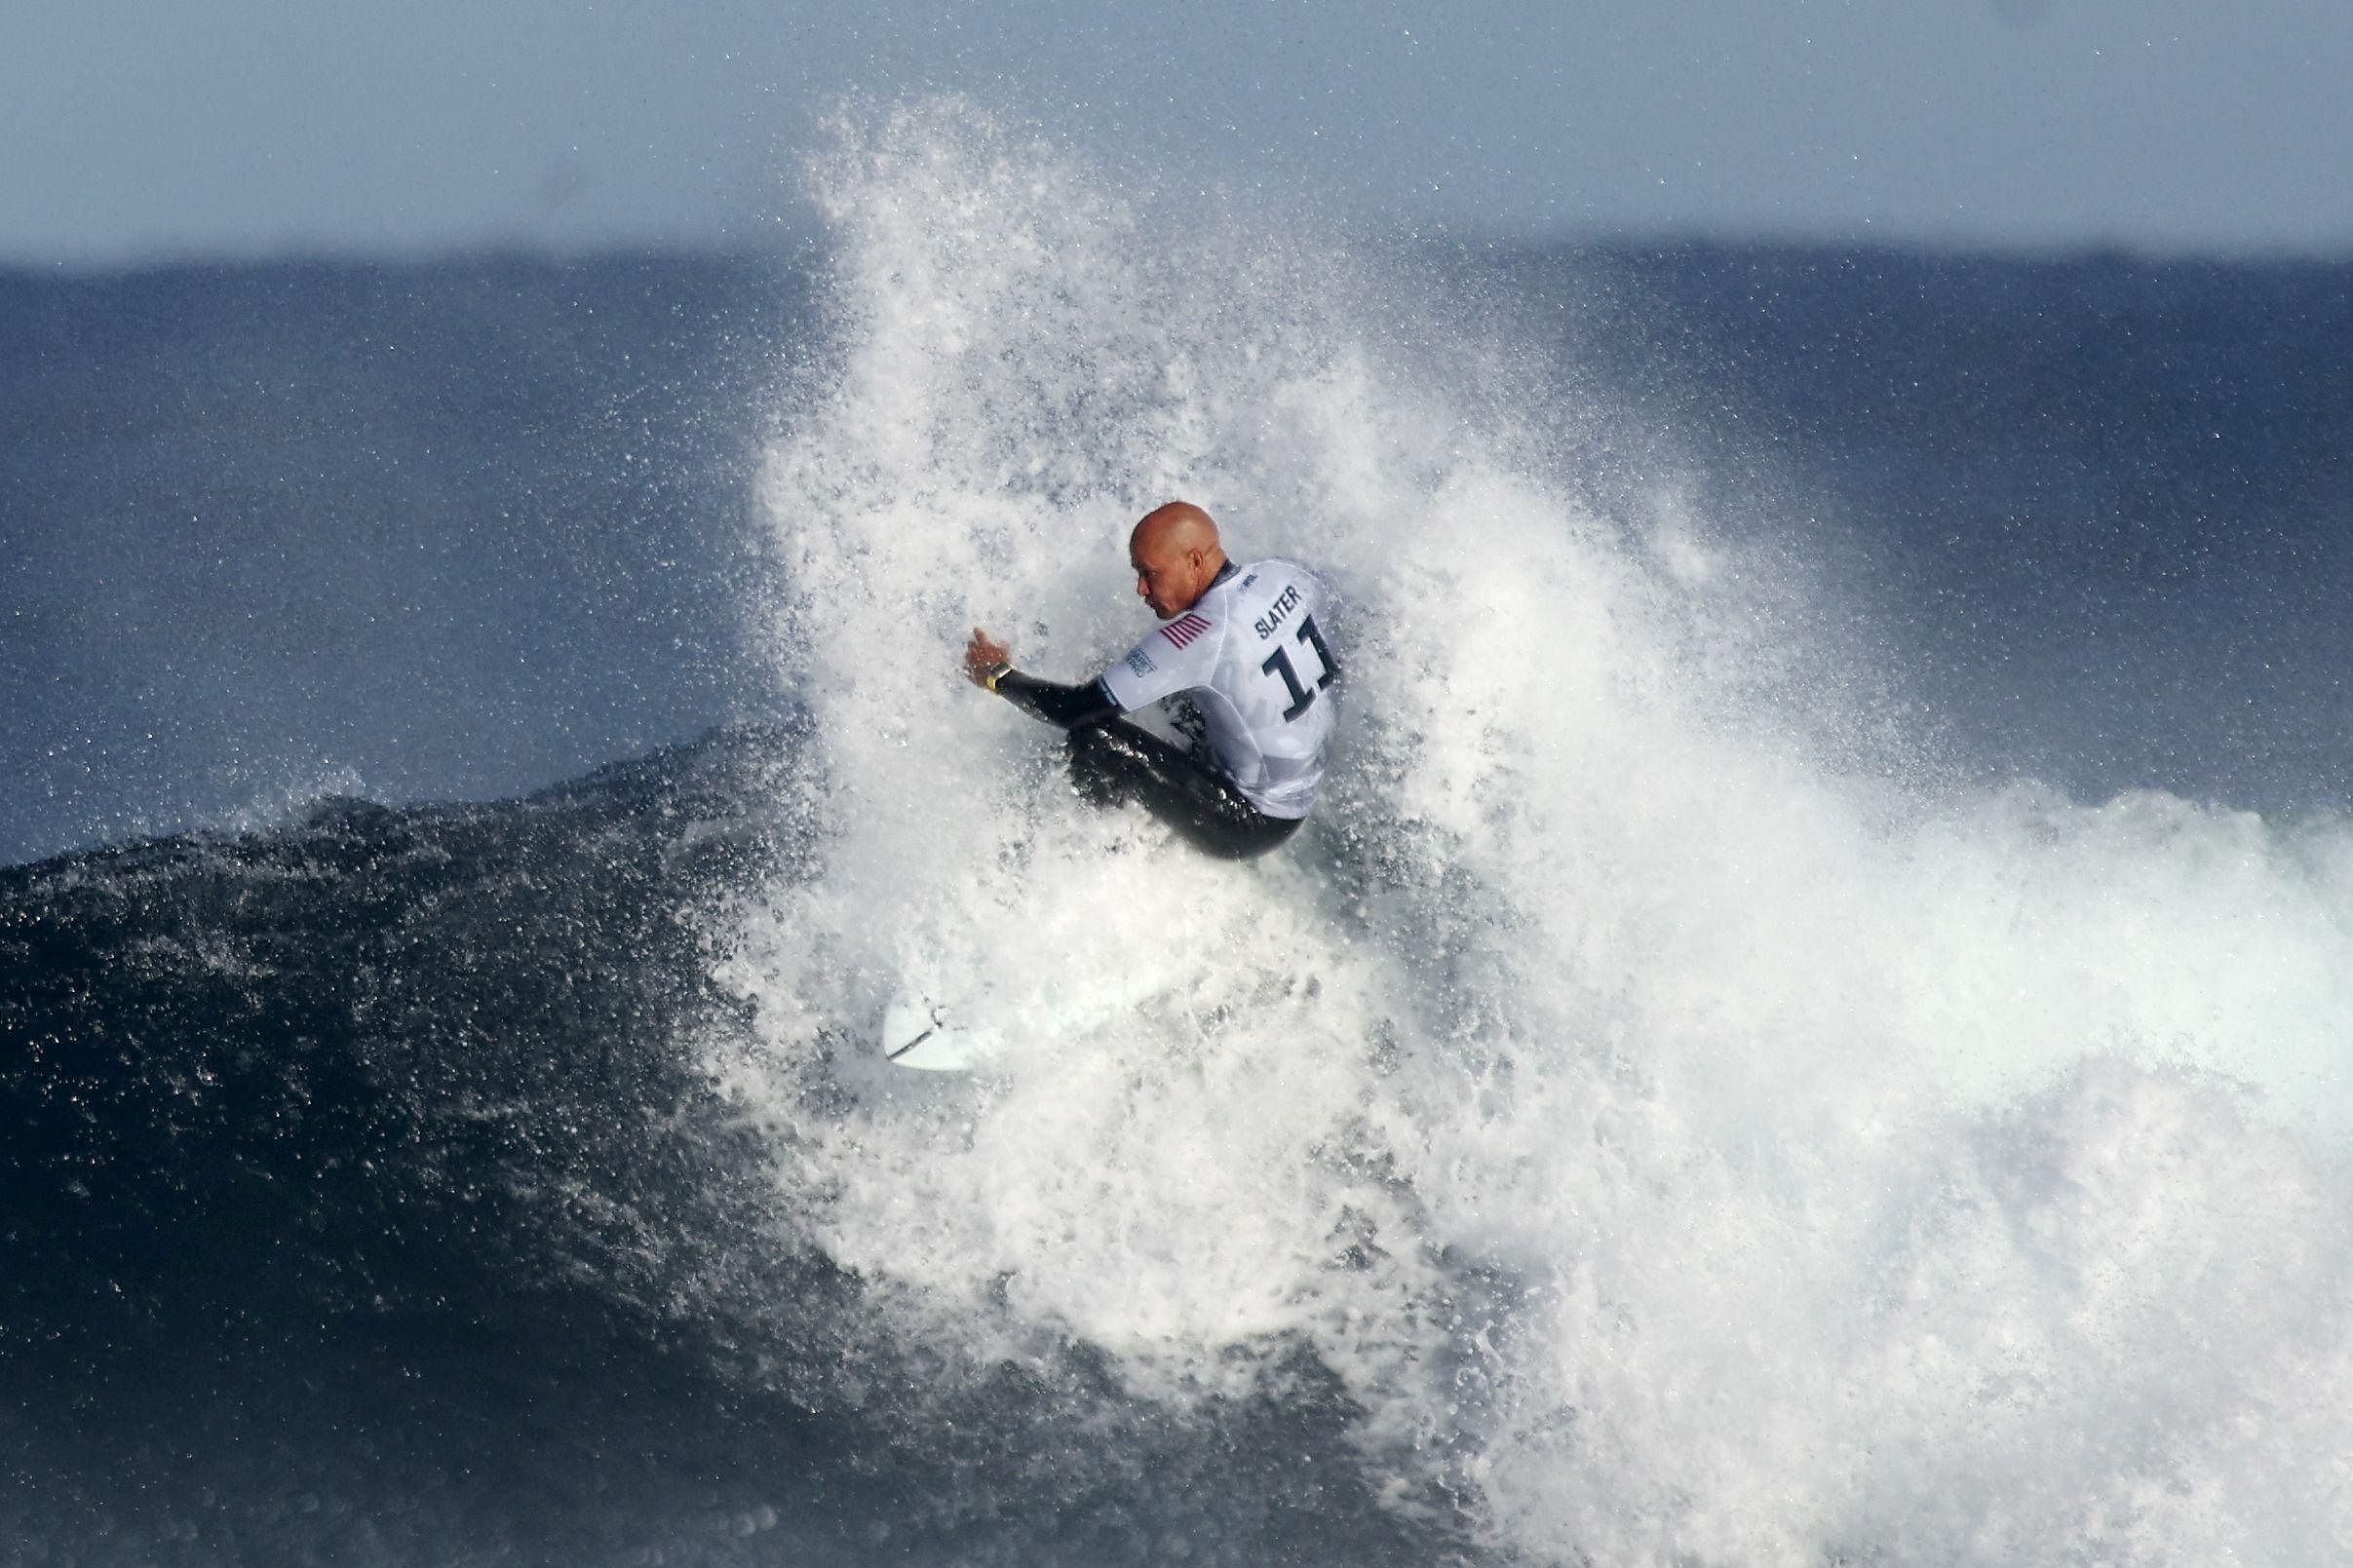 Kelly Slater bows out after missing World Tour cut